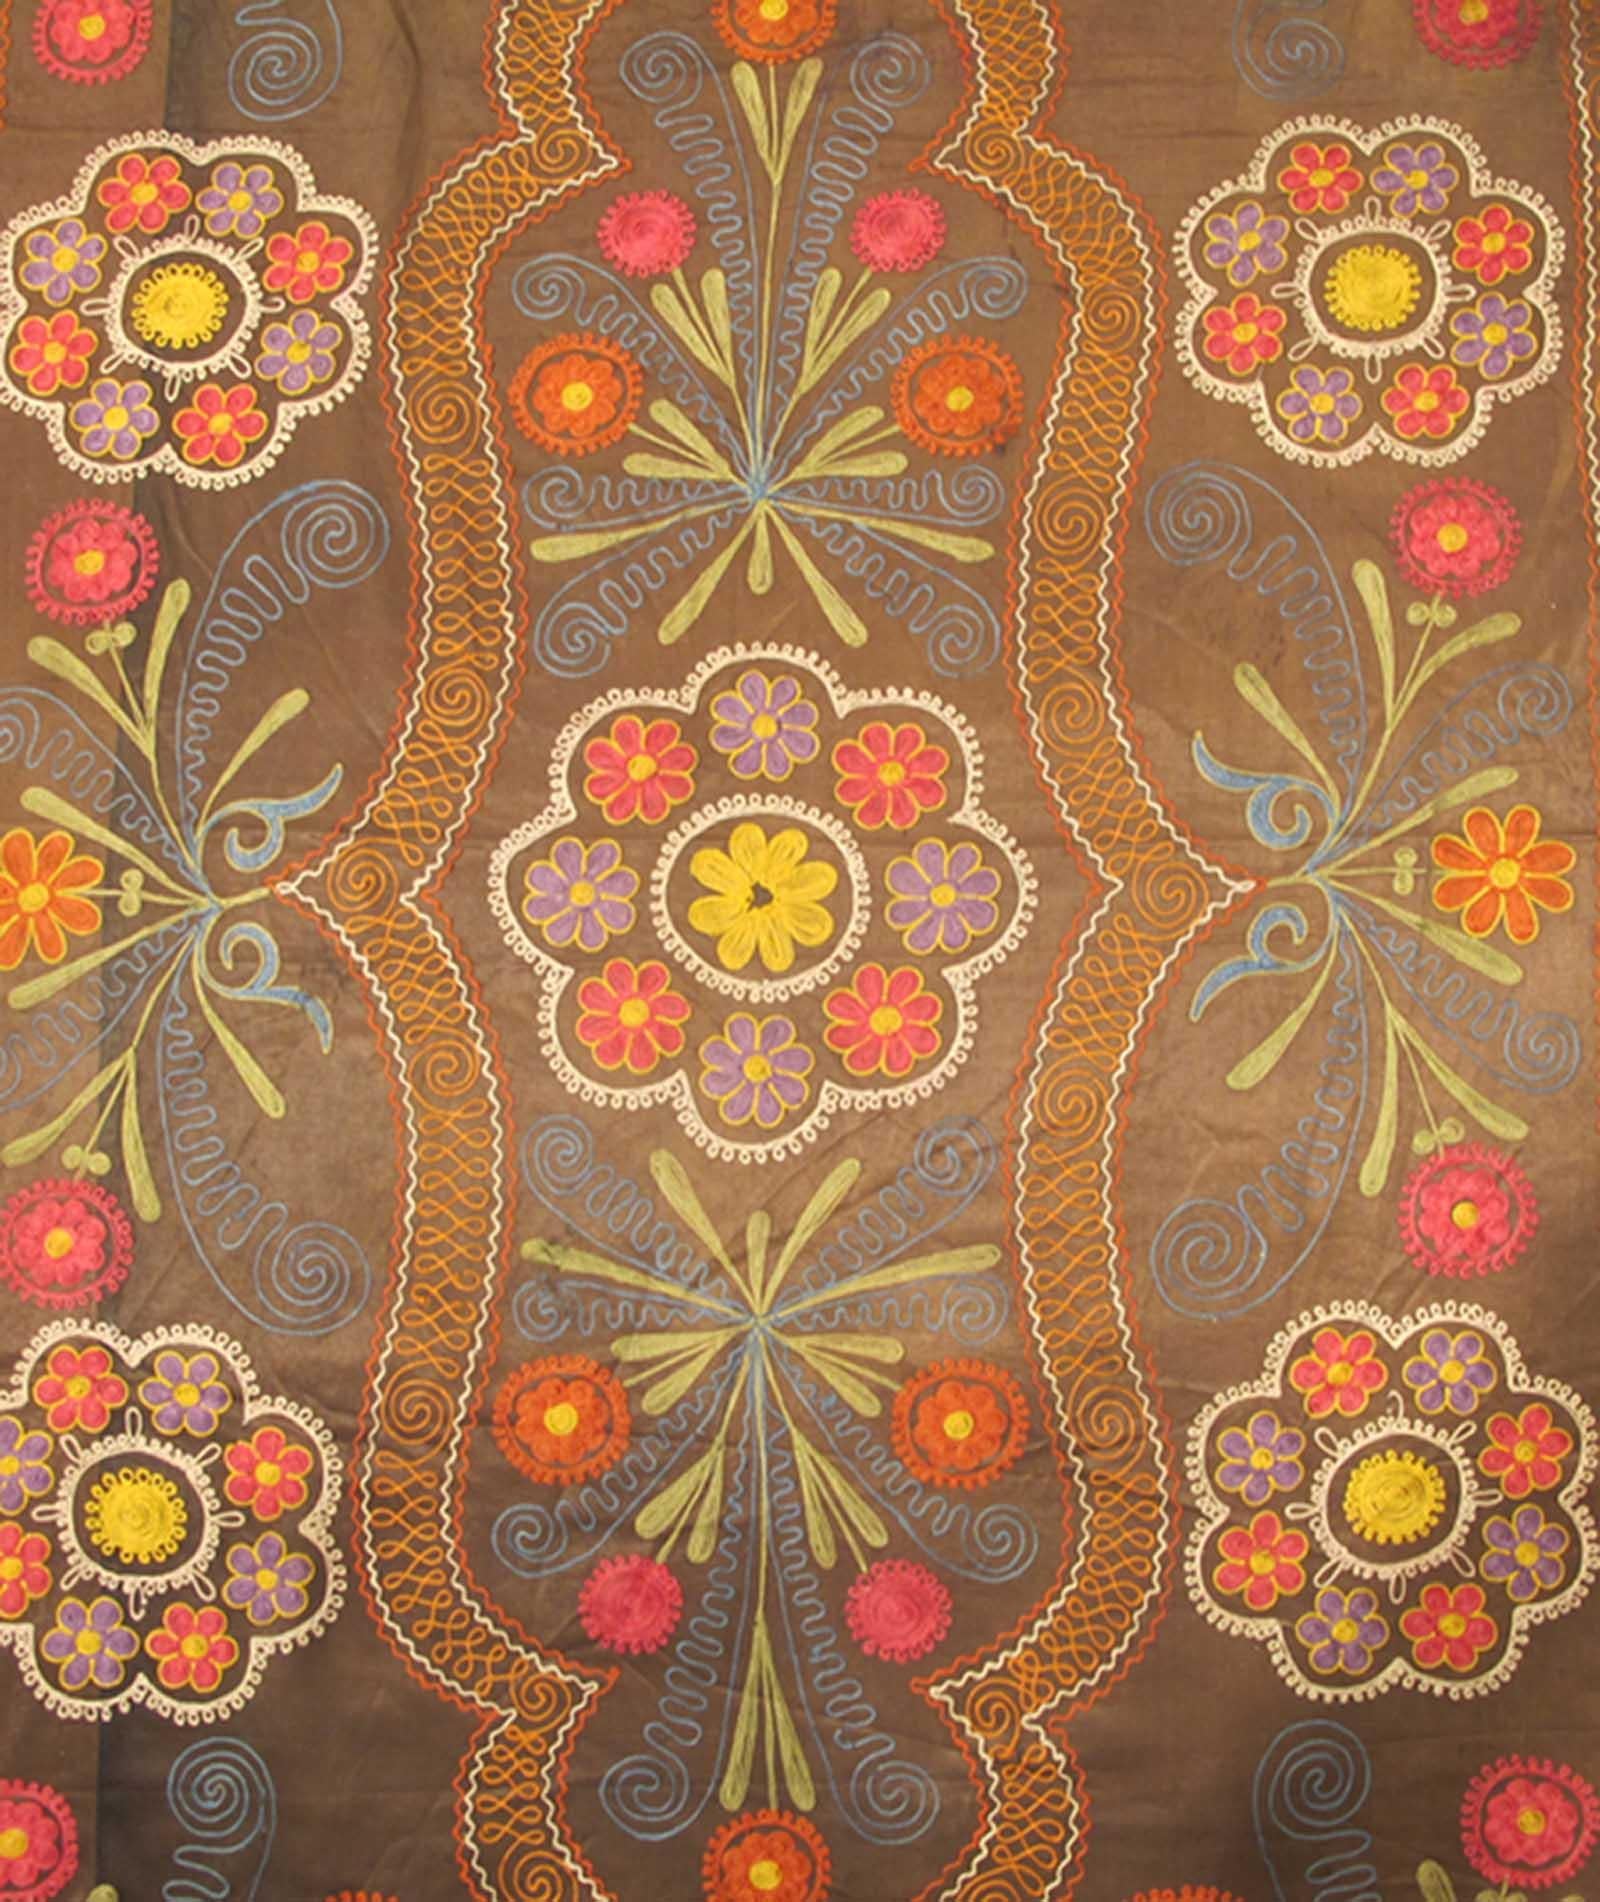 Hand-Woven Embroidery Suzani Vintage with Medallion Design